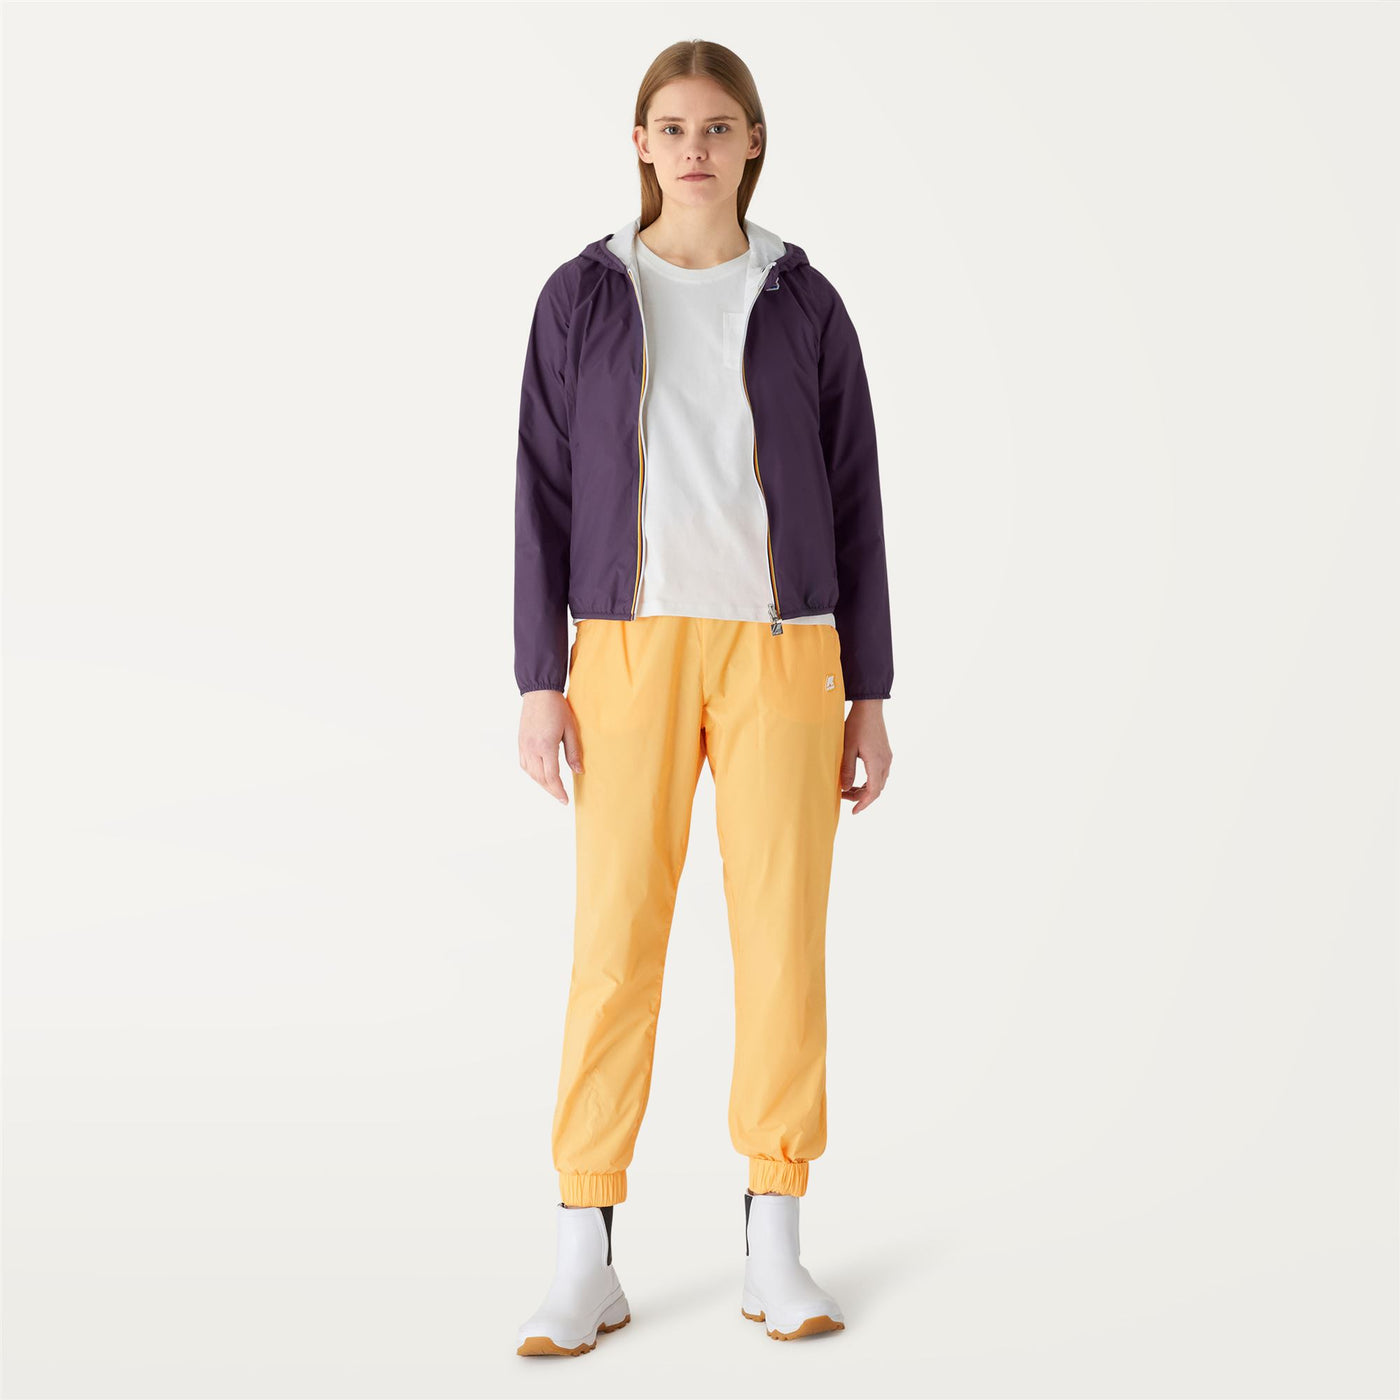 Jackets Woman LILY PLUS.2 DOUBLE Short VIOLET - WHITE | kway Dressed Back (jpg Rgb)		